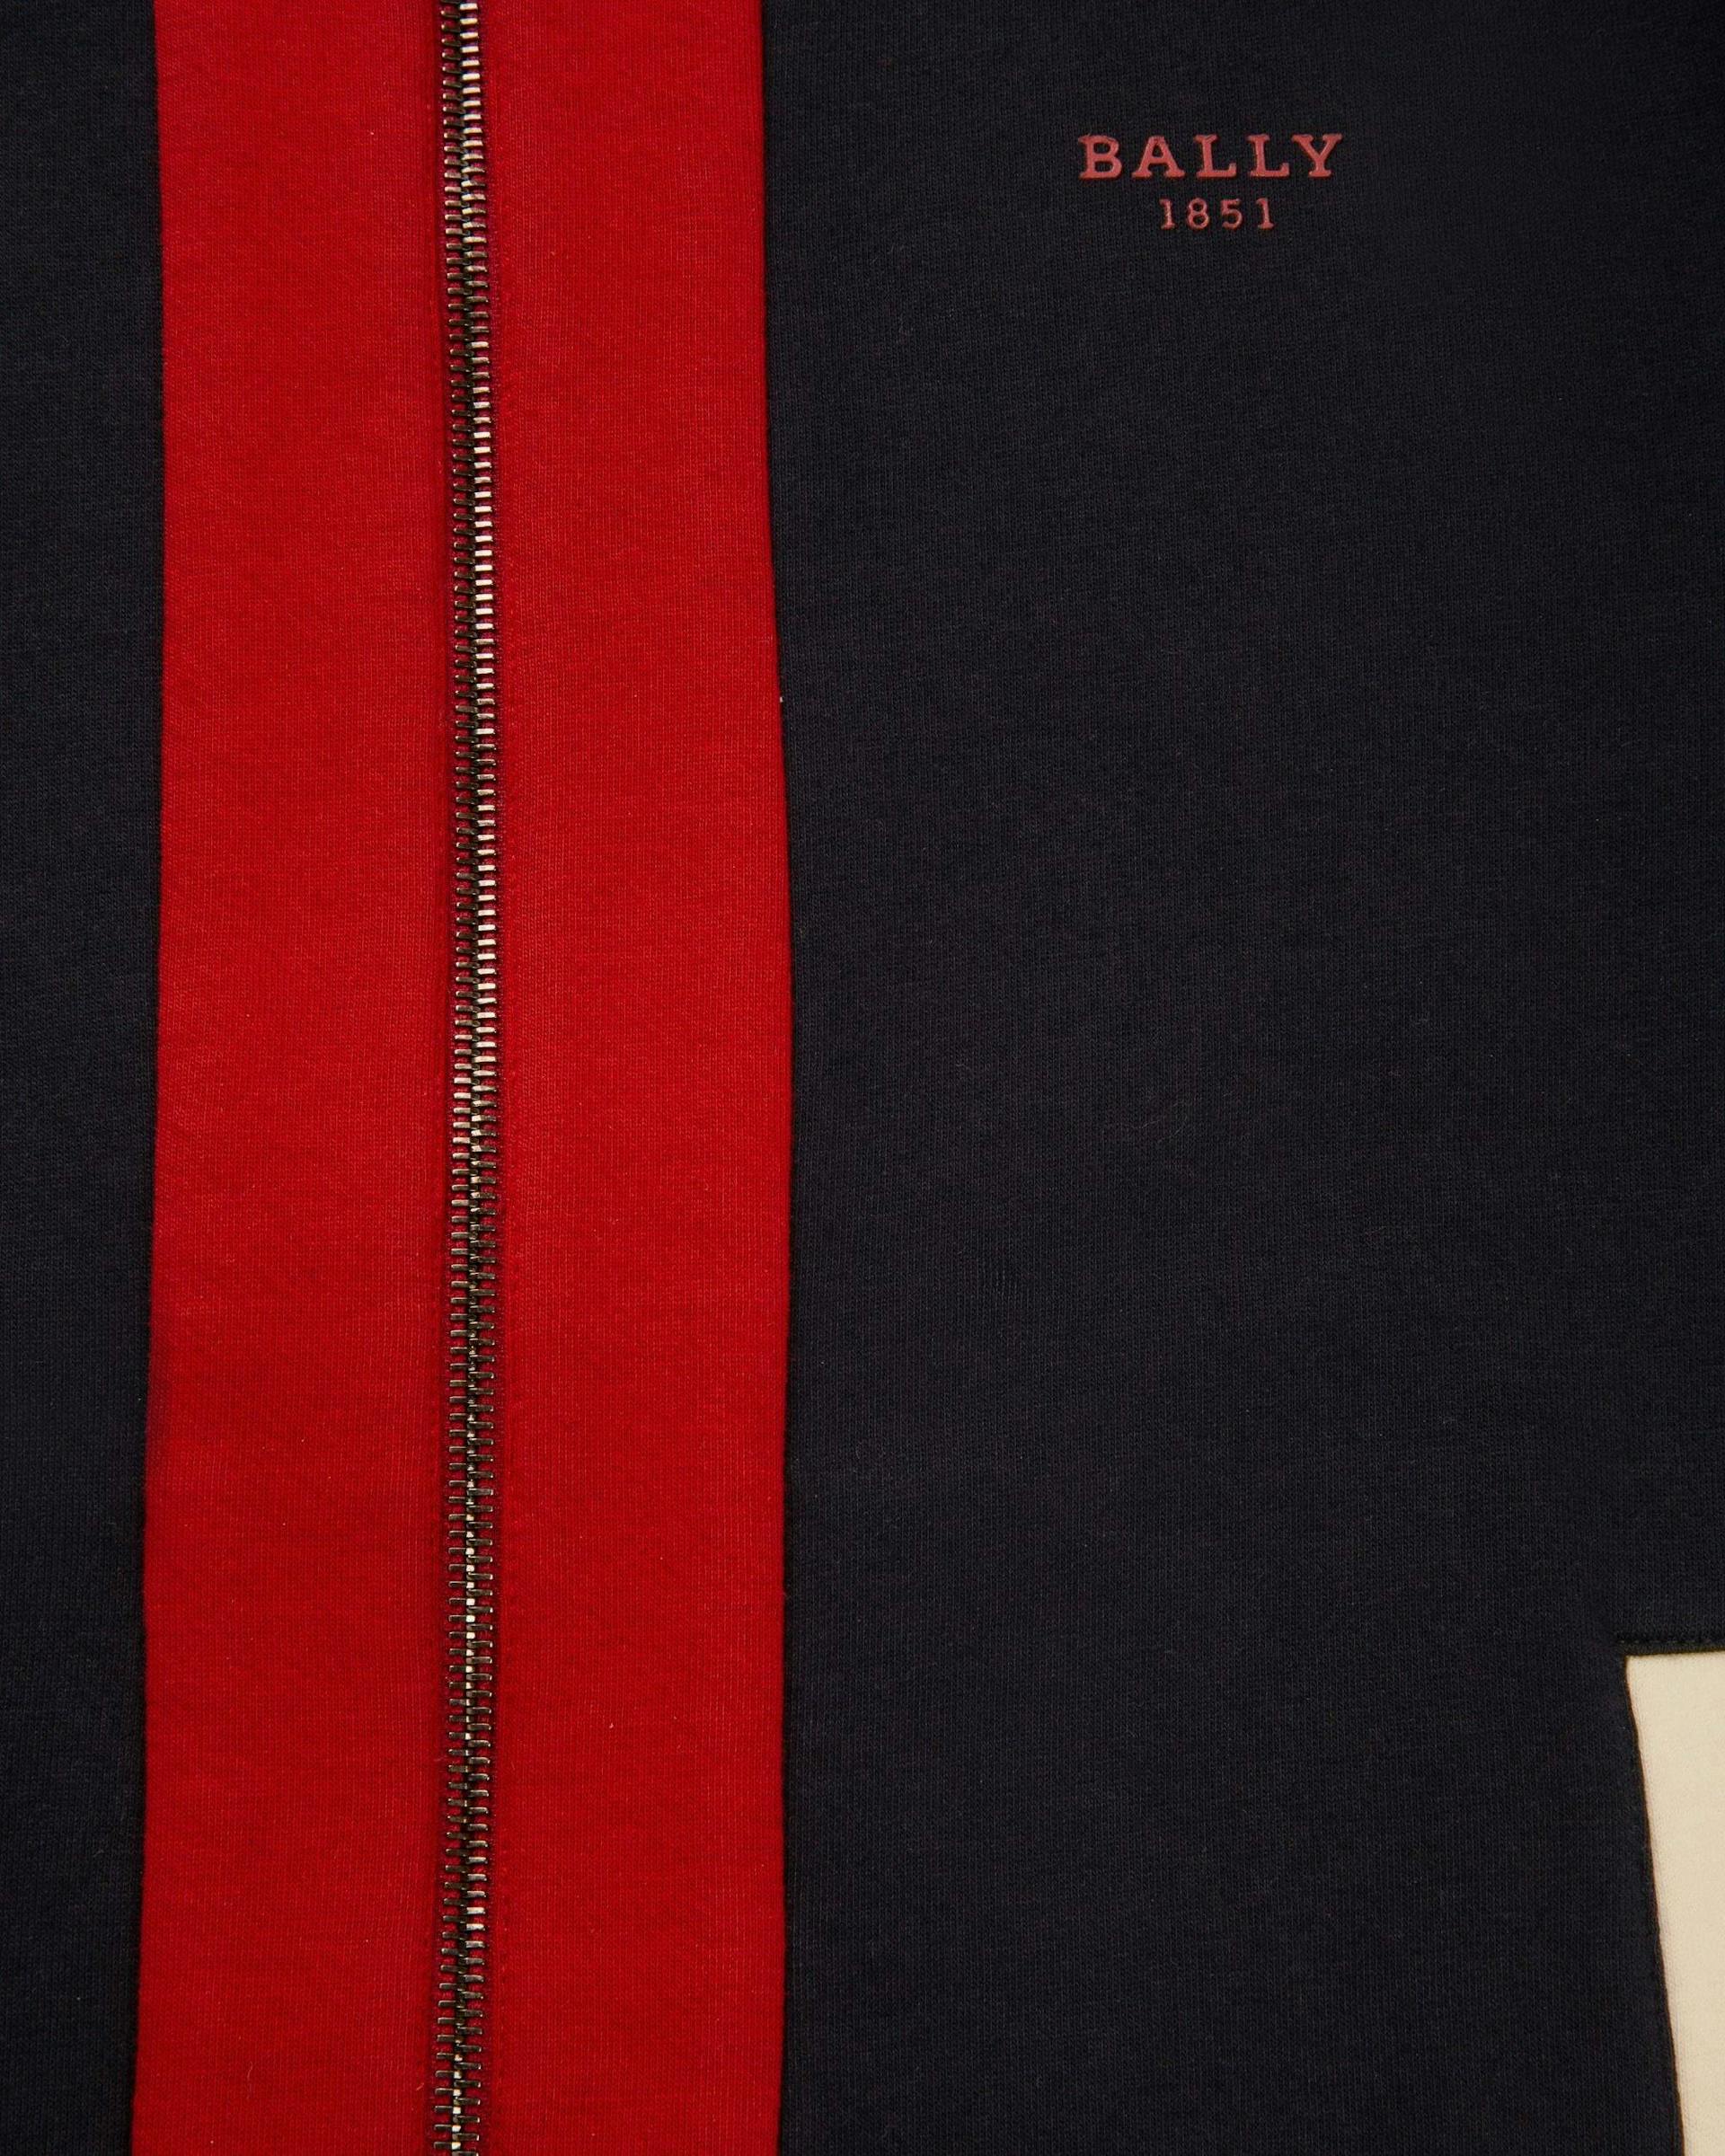 Tracksuit Cotton Sweatshirt In Navy & Bally Red - Men's - Bally - 07